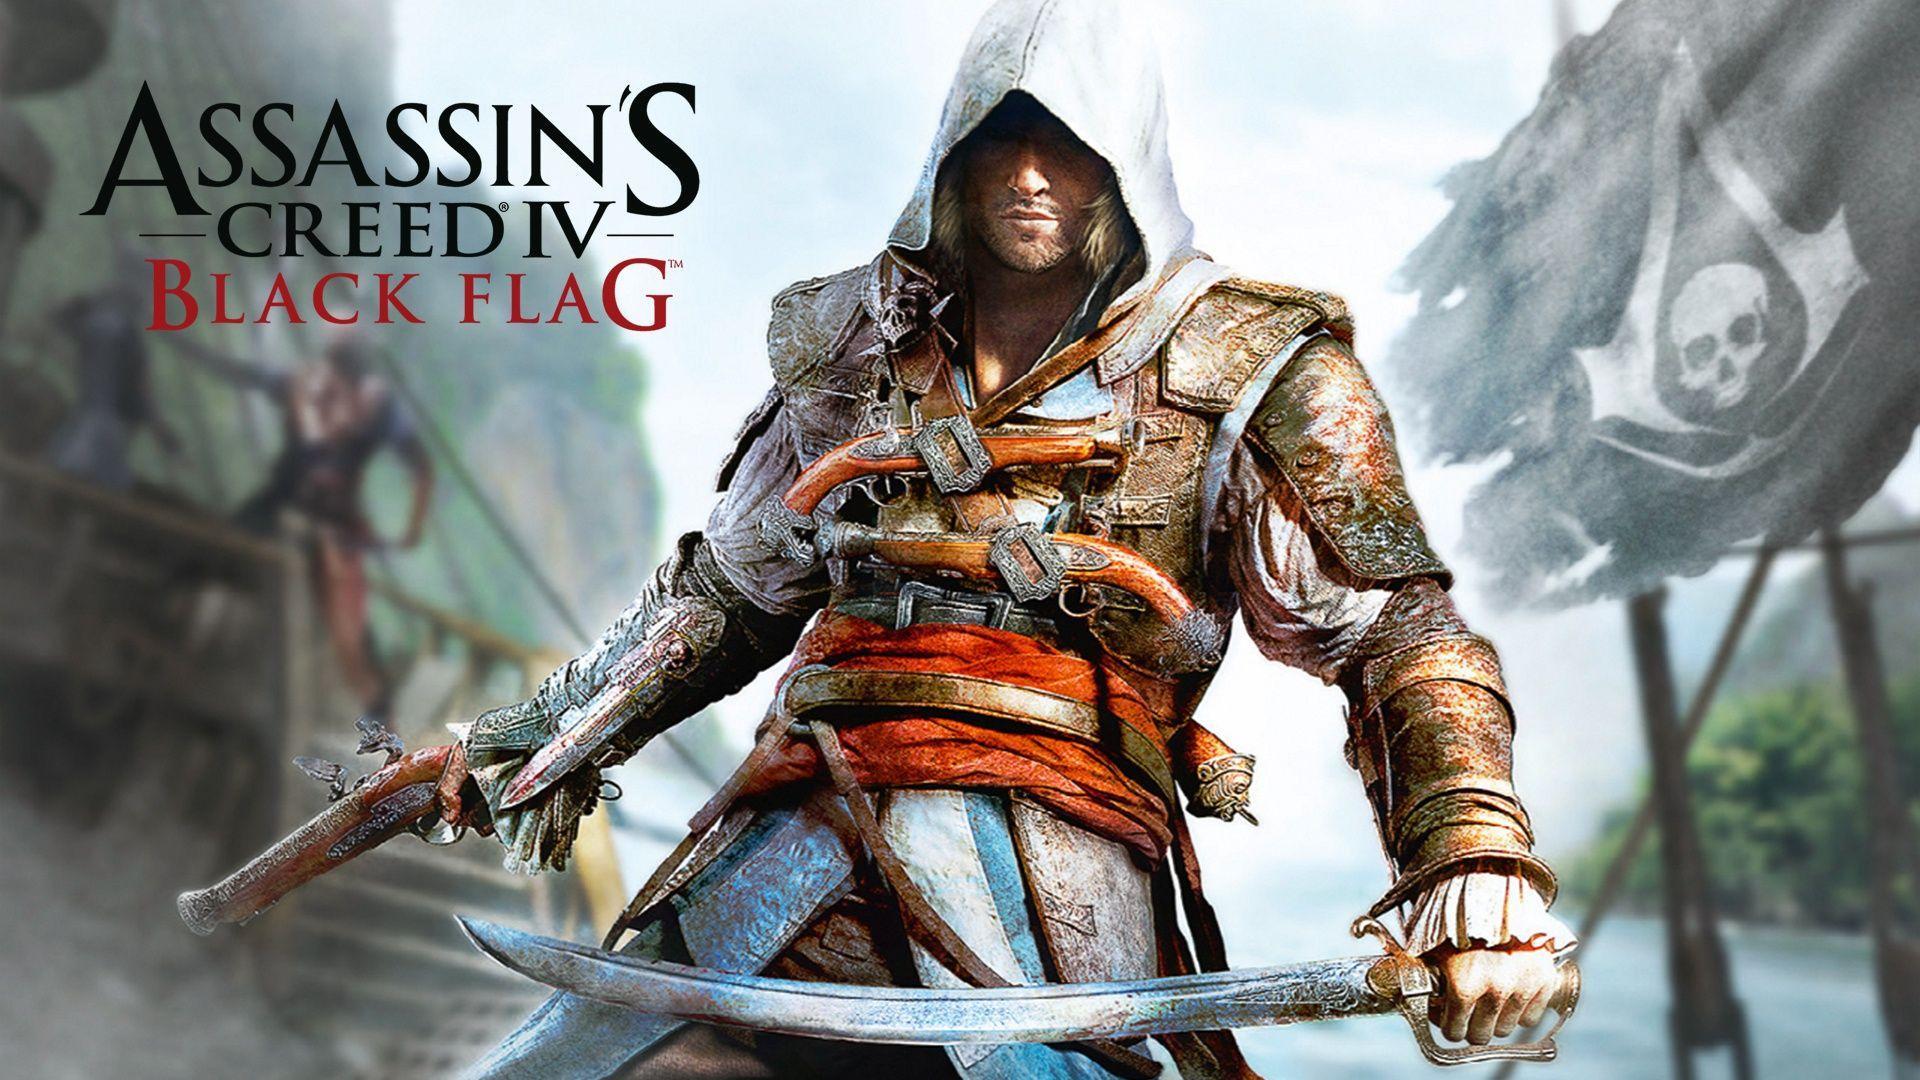 Assassin's Creed IV: Black Flag Wallpapers - Wallpaper Cave